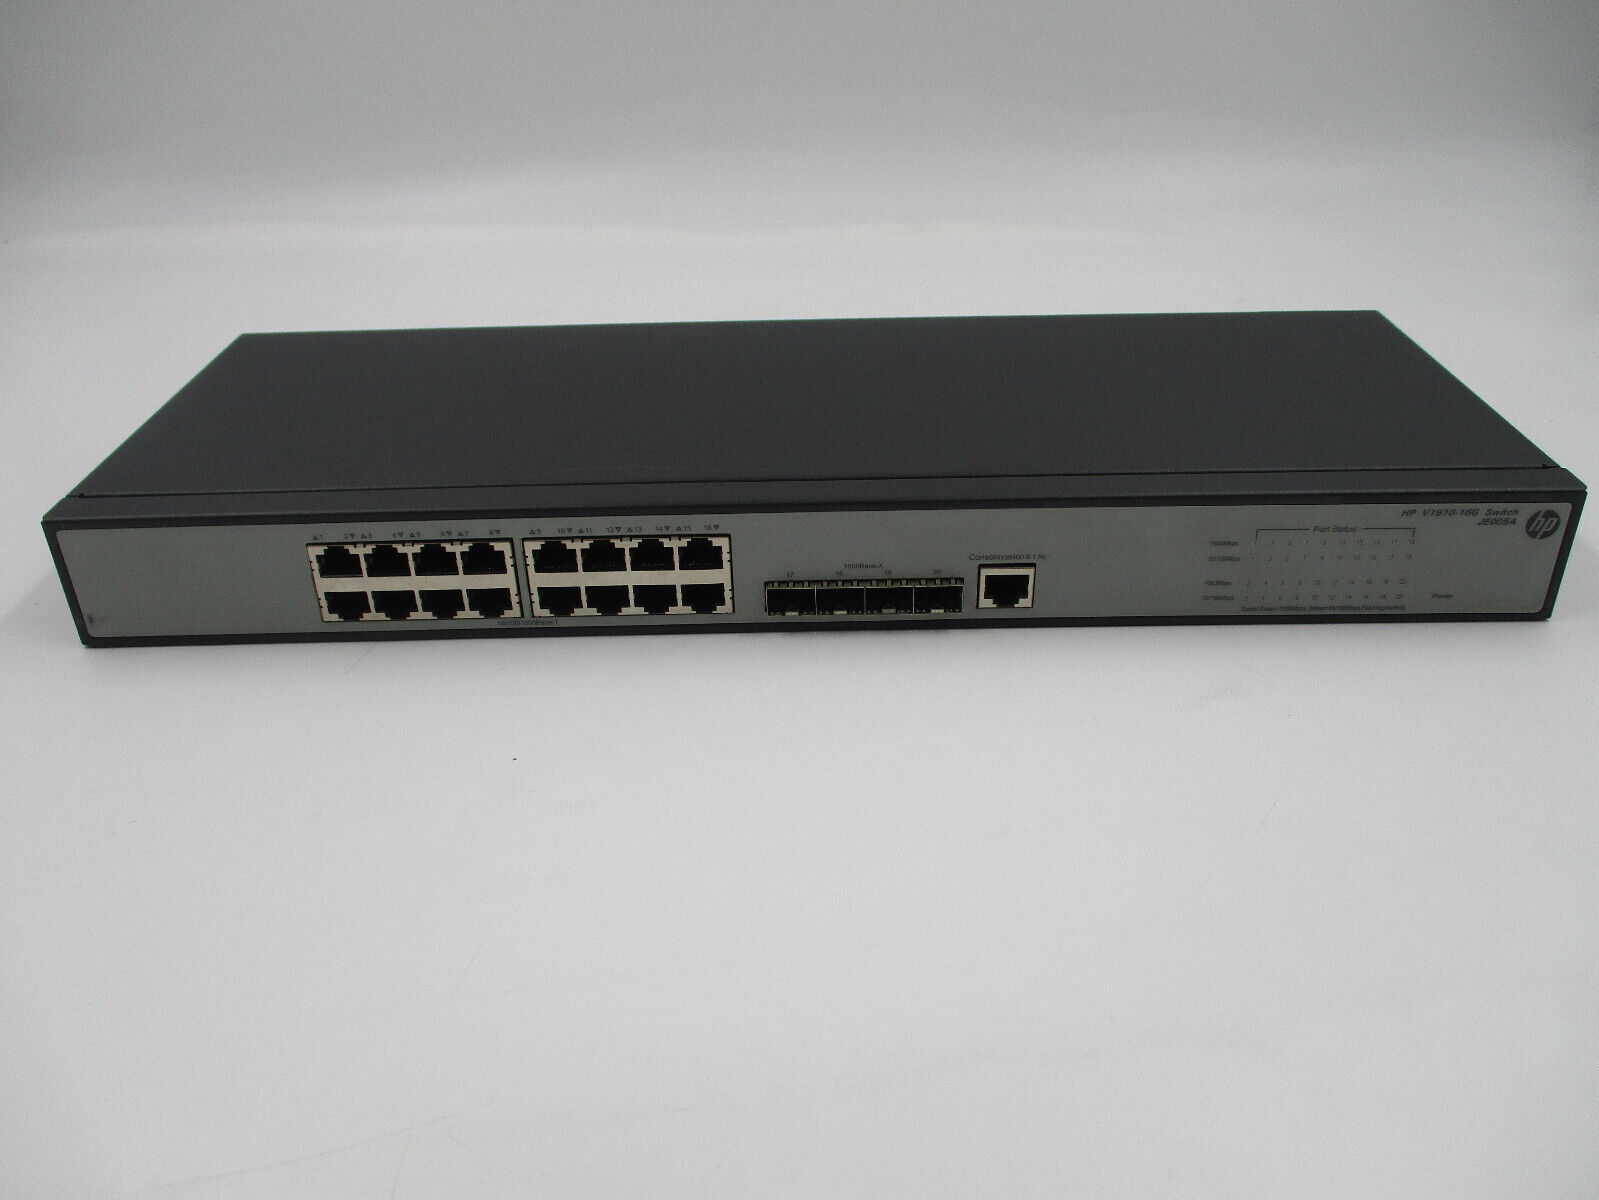 HP V1910-16G 16-Port 4xSFP Managed Ethernet Switch P/N: JE005A Tested Working